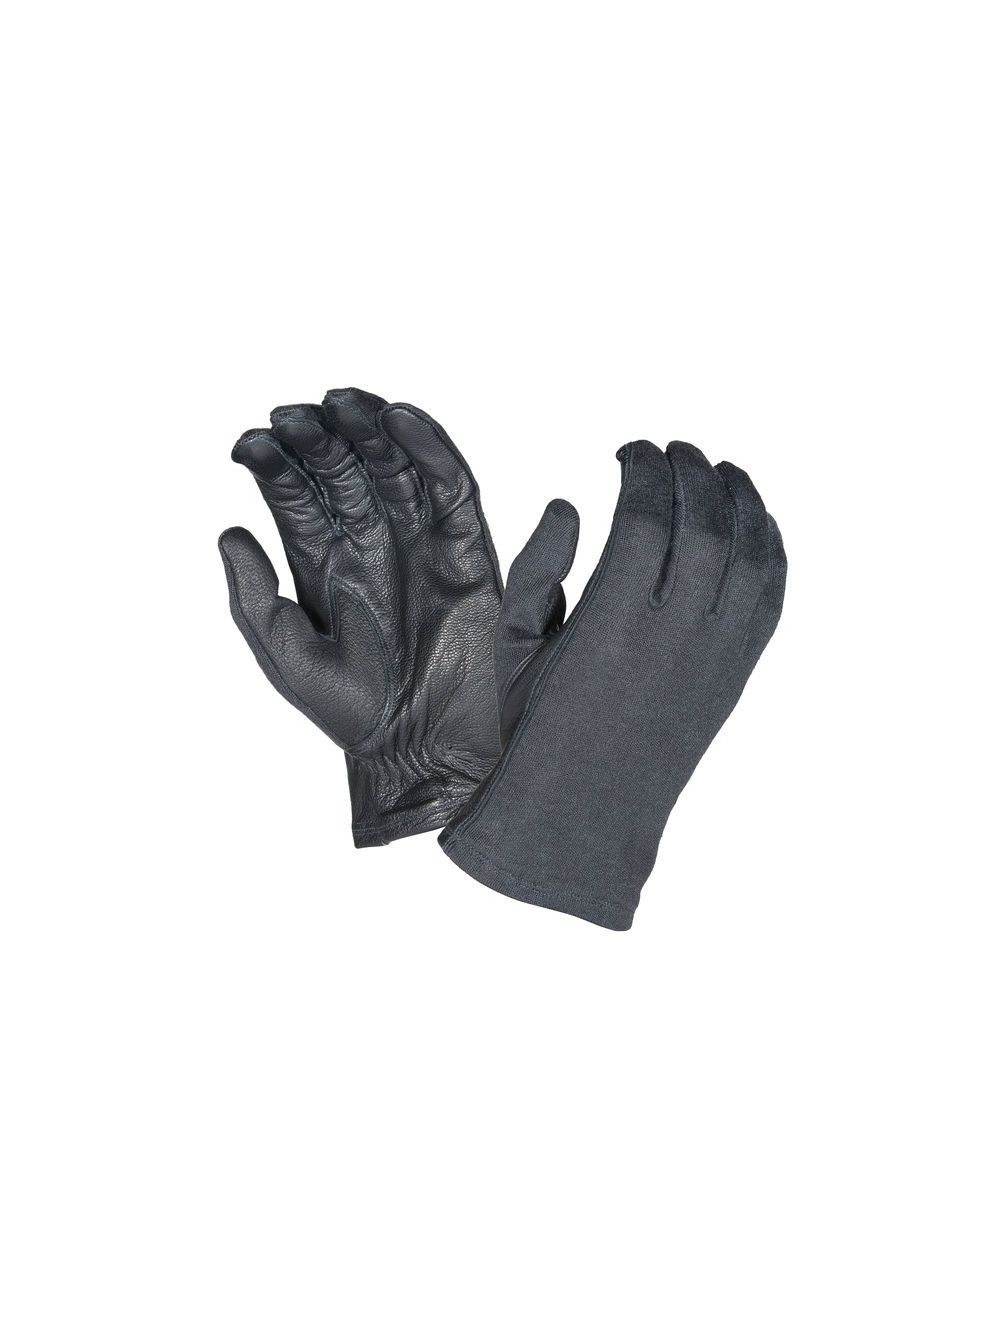 Tactical Pull-On Operator Glove w/ Kevlar